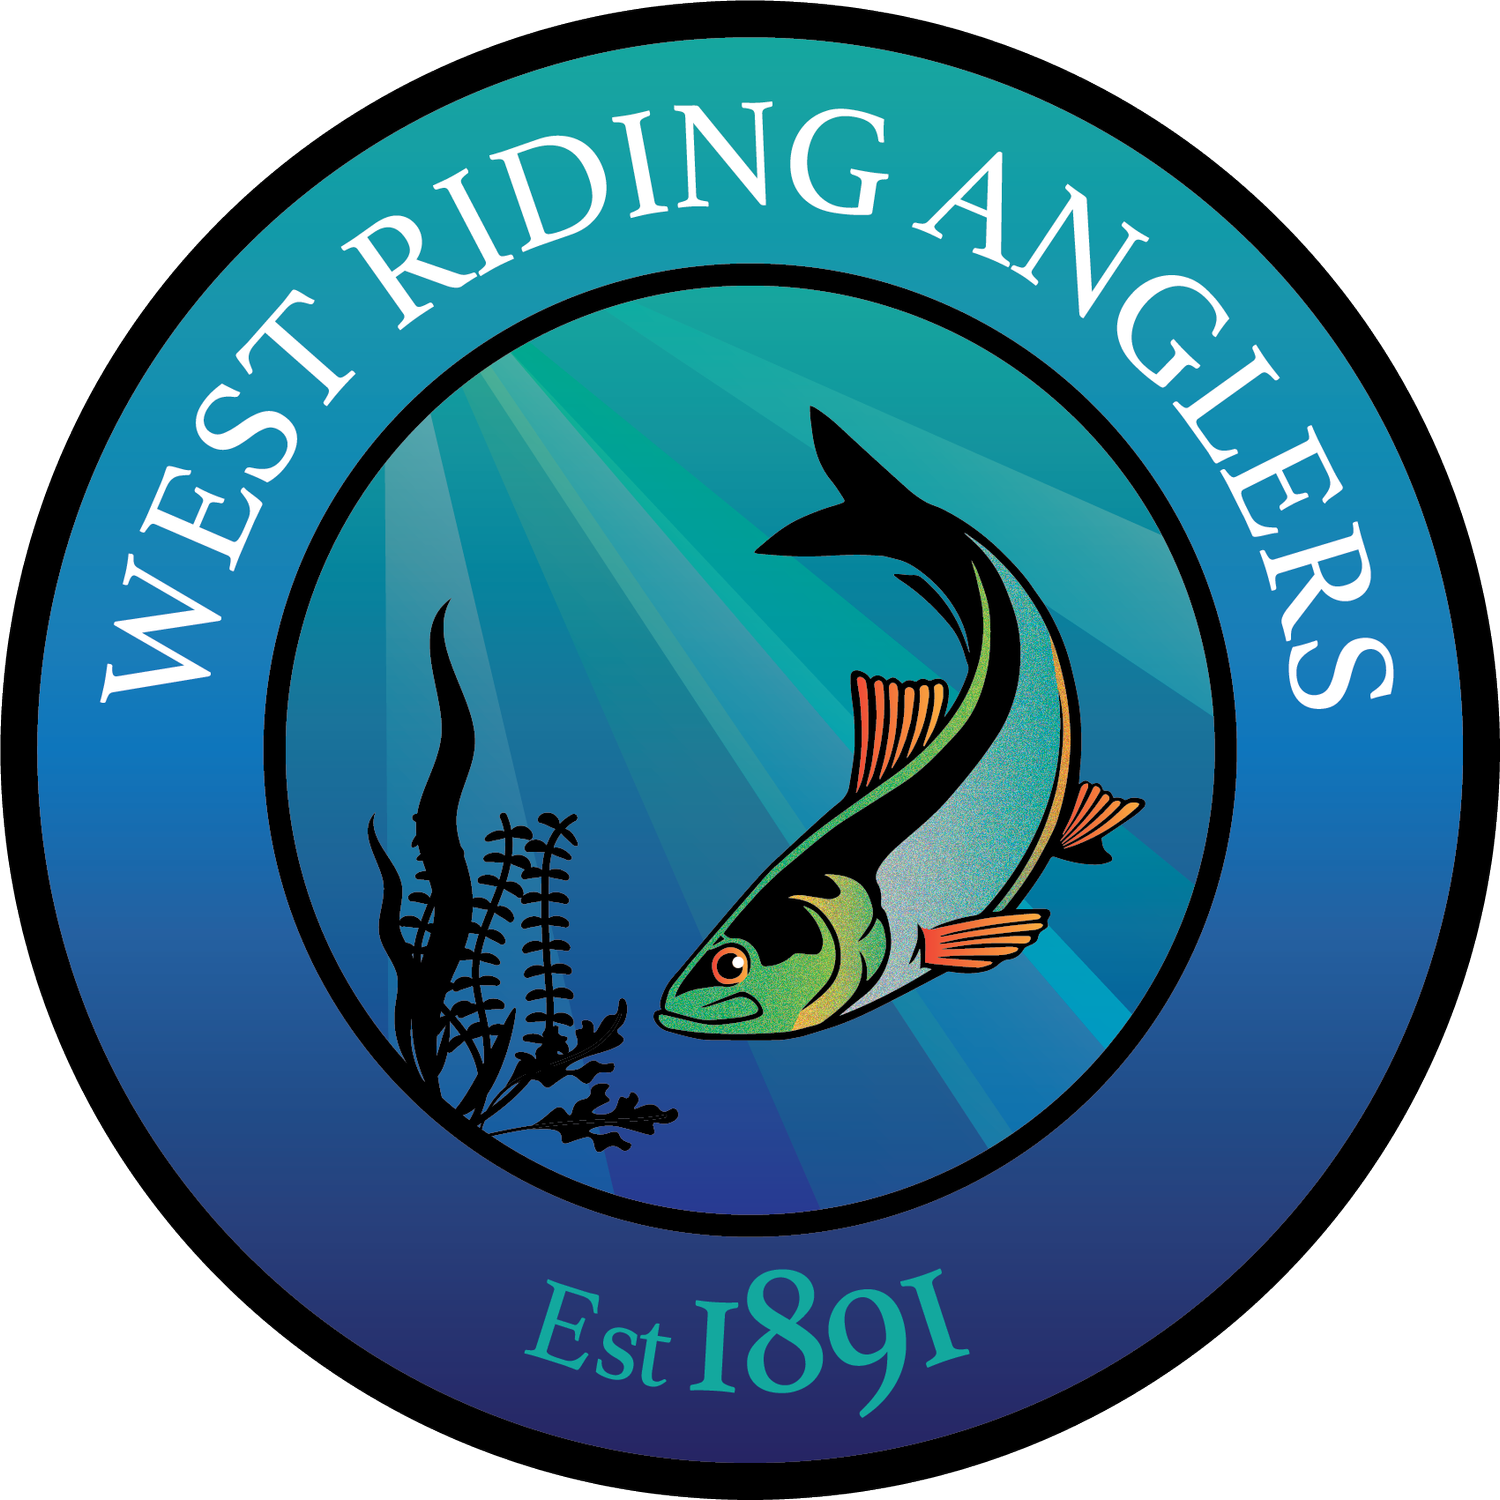 West Riding Anglers